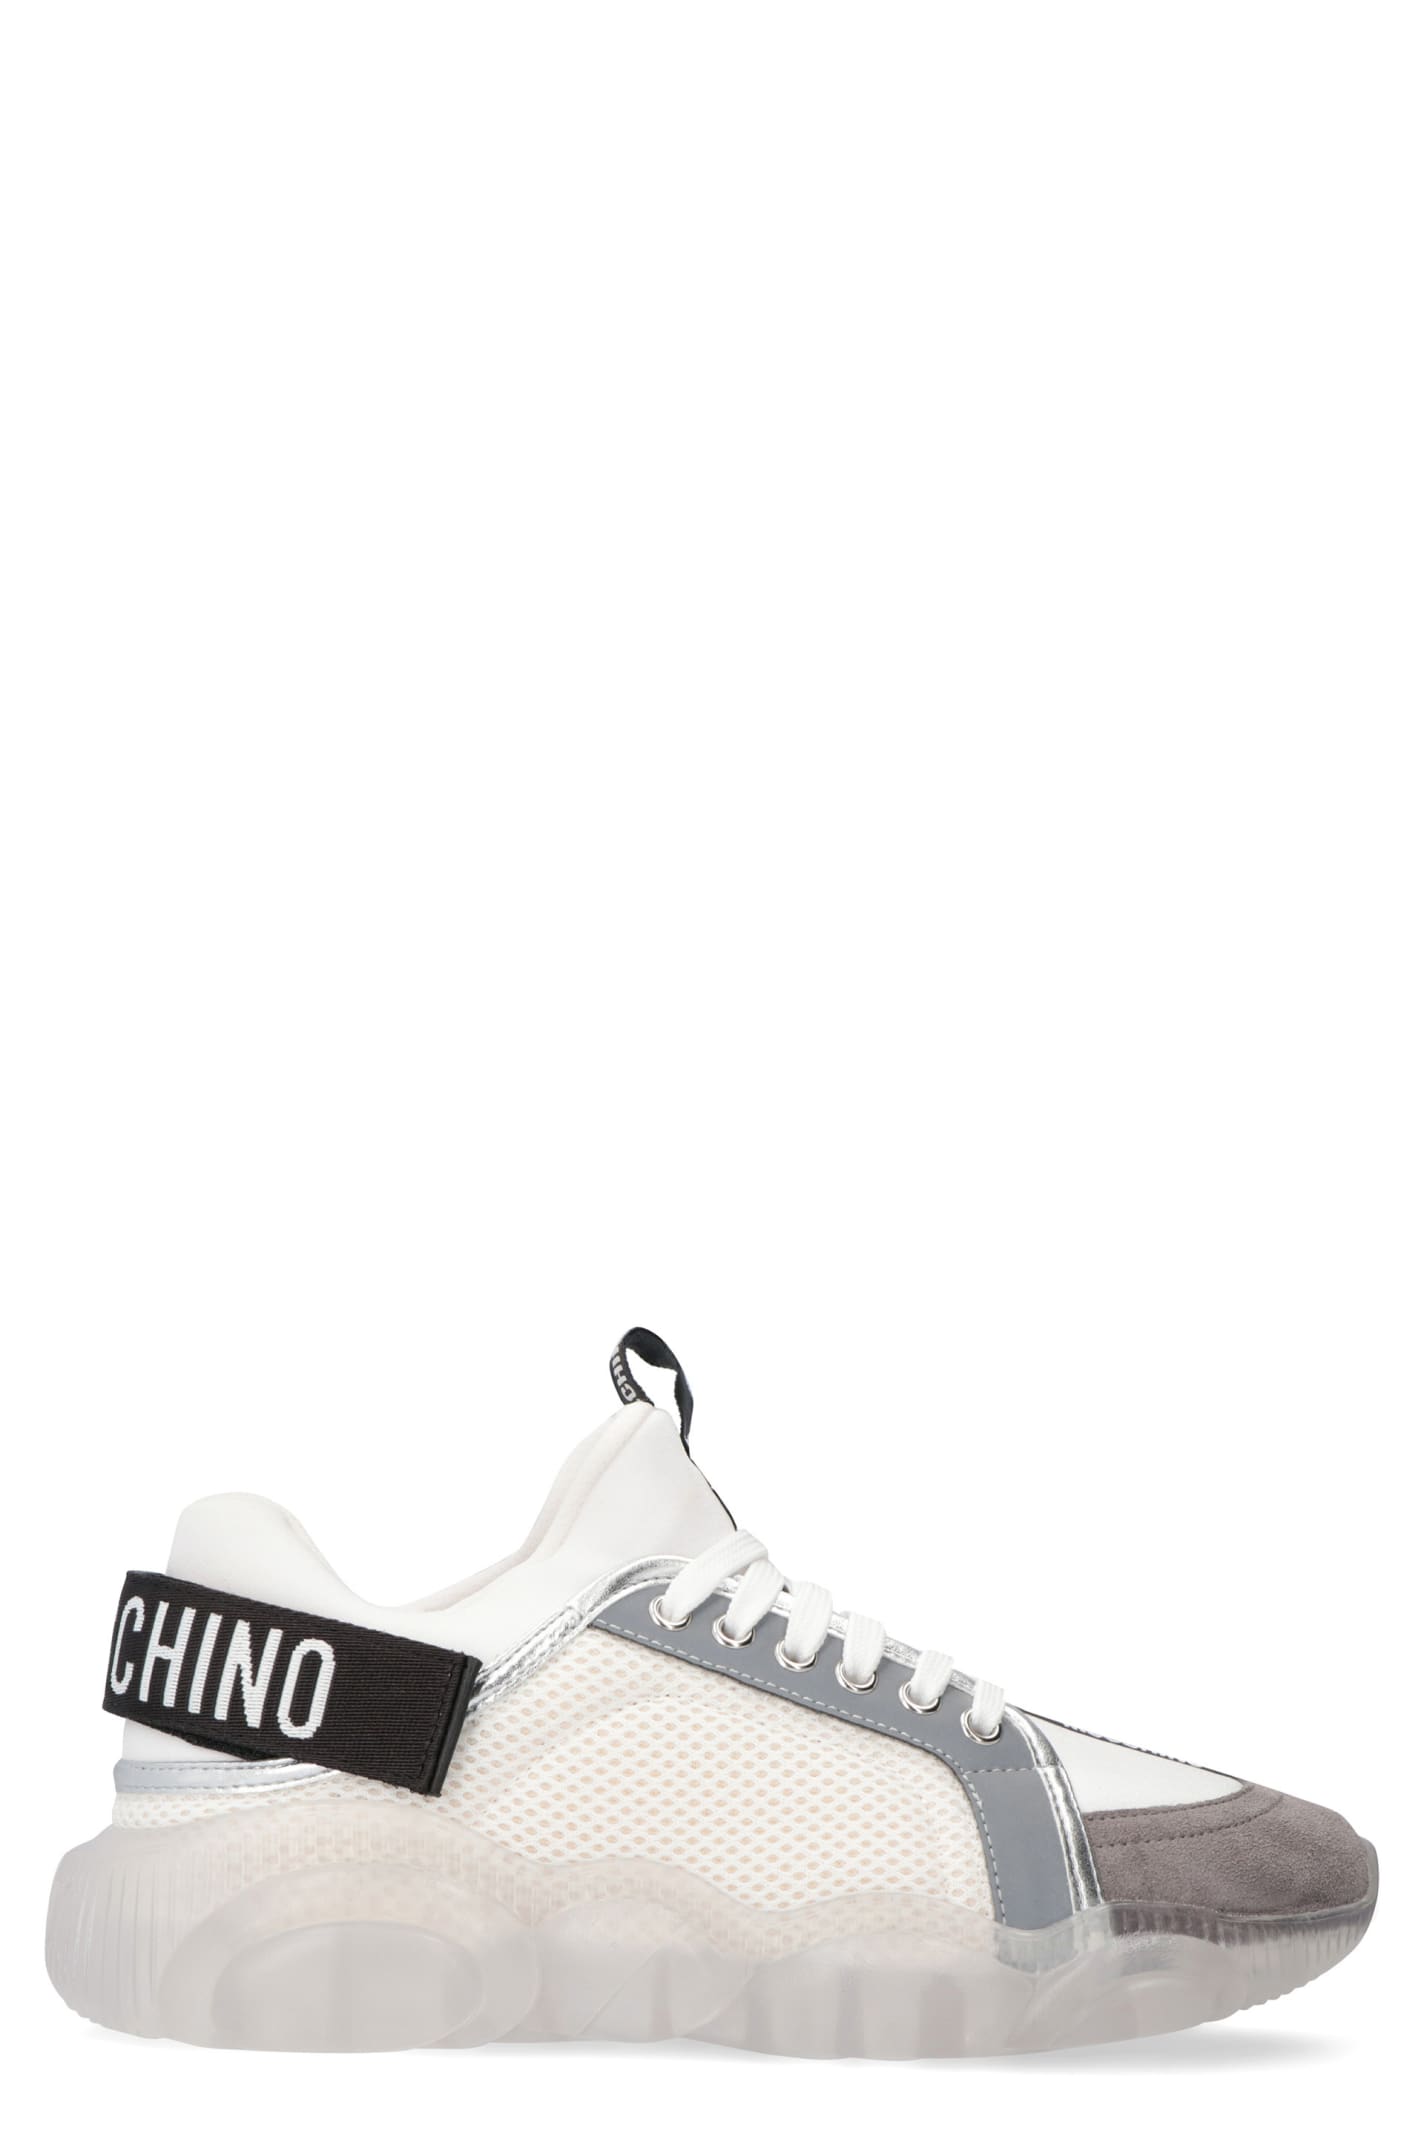 Moschino Teddy Low-top Sneakers